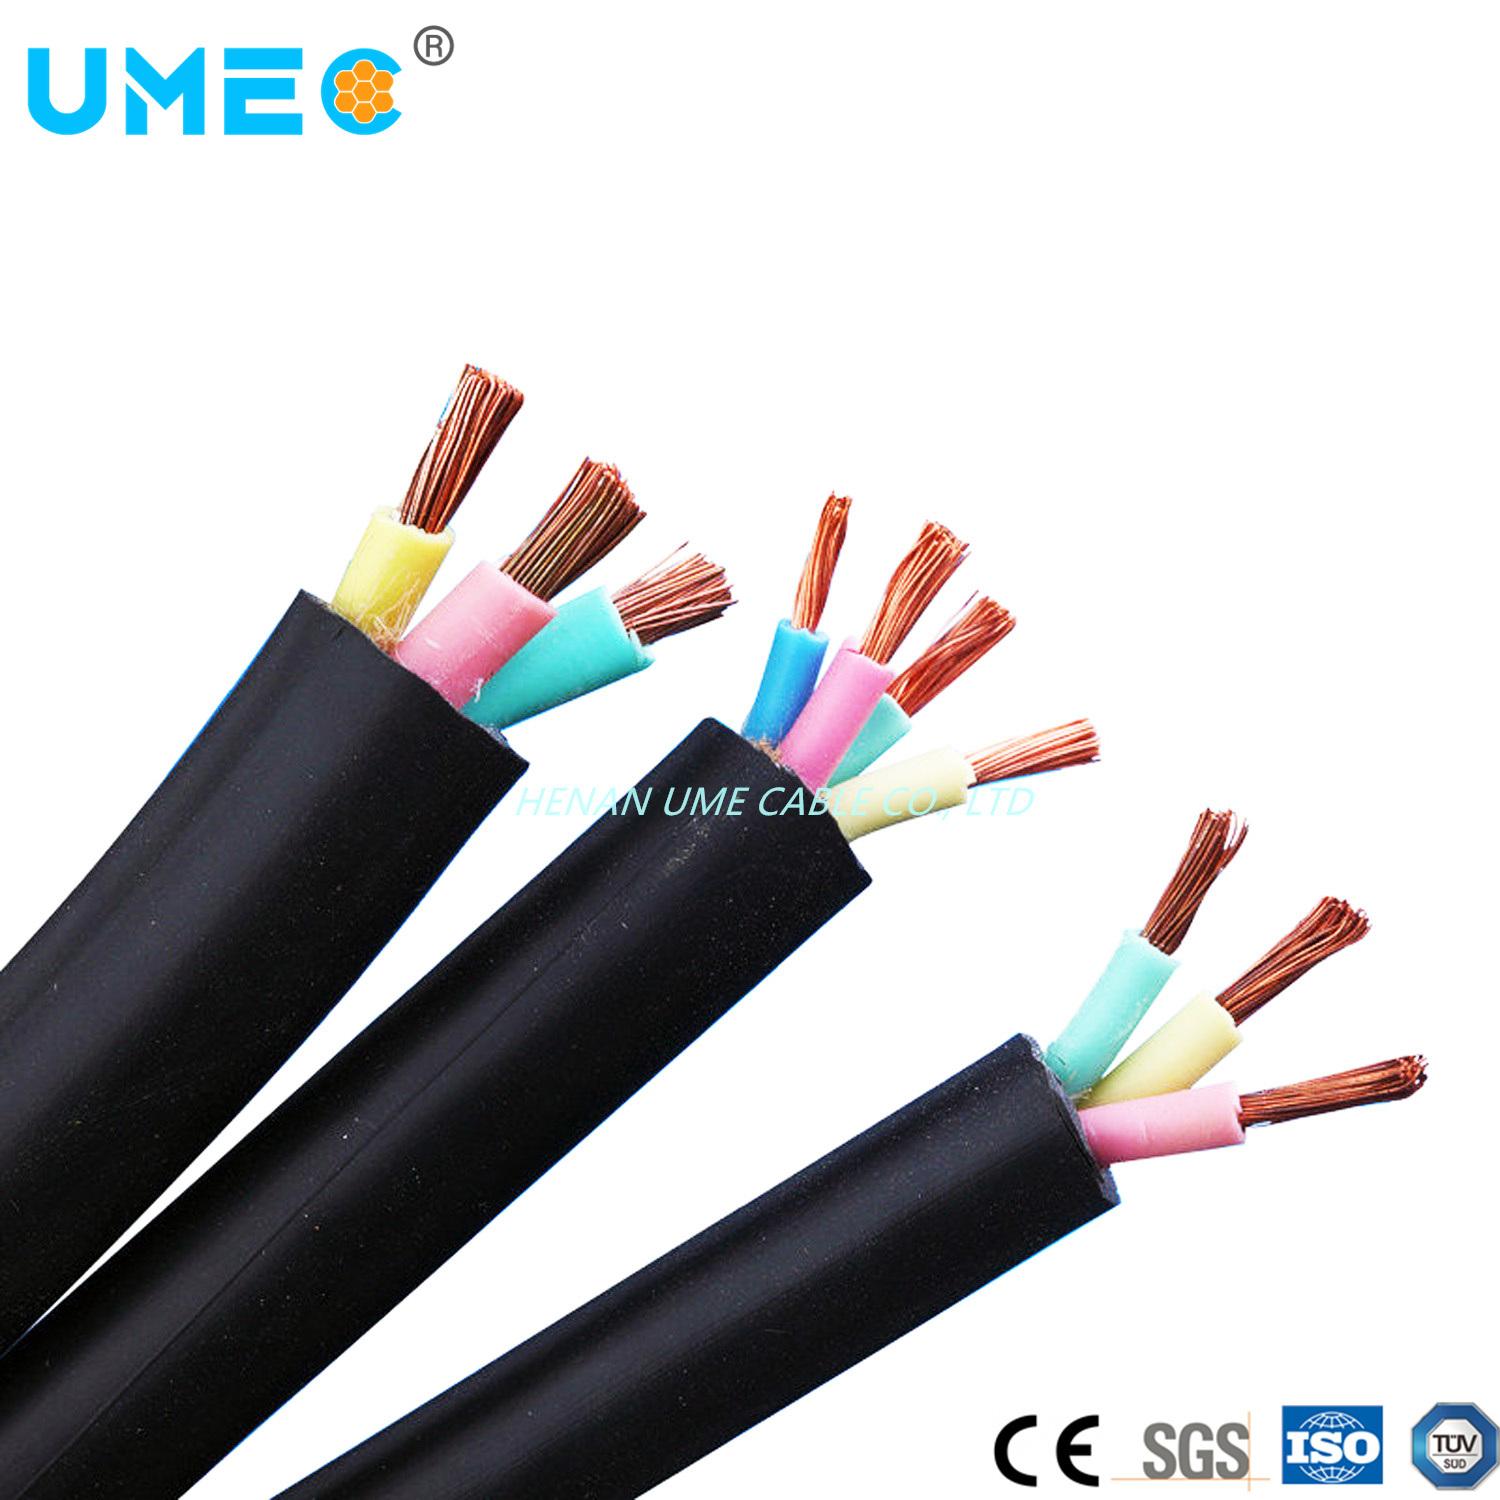 Multicore Copper PVC Insulated PVC Sheath Myym H05VV-F 22AWG 24AWG 26AWG Cable